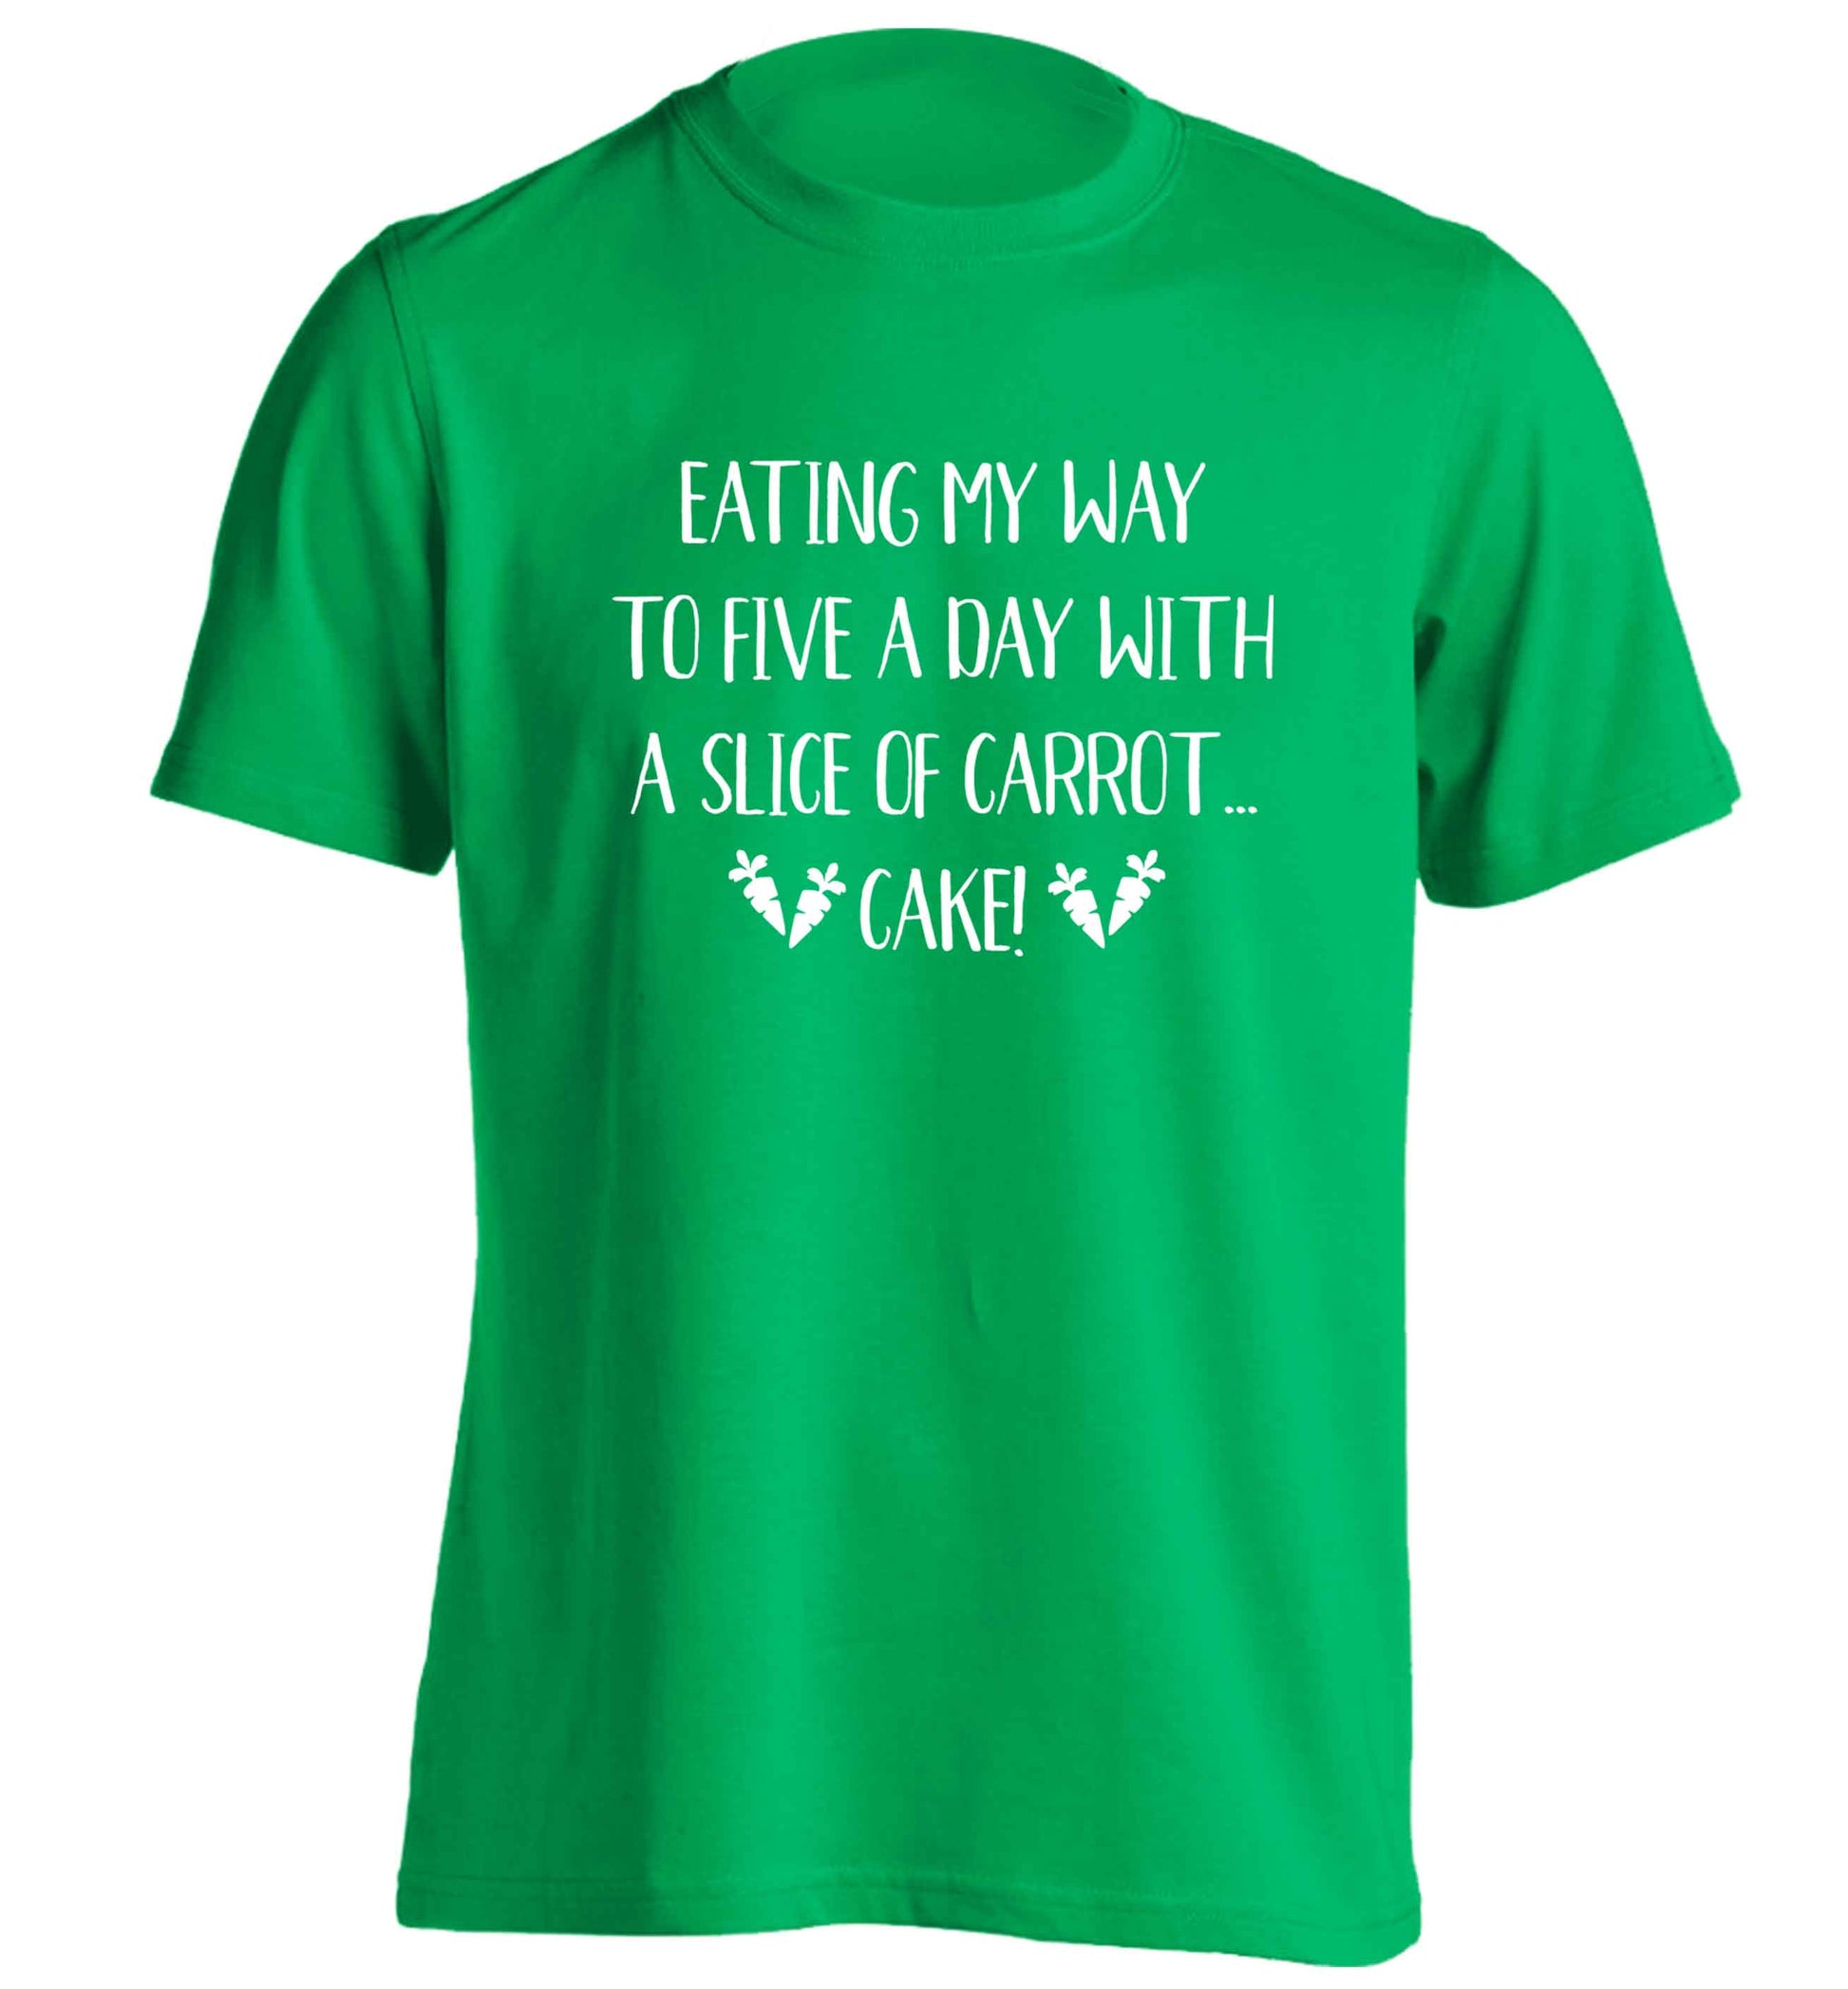 Eating my way to five a day with a slice of carrot cake day adults unisex green Tshirt 2XL